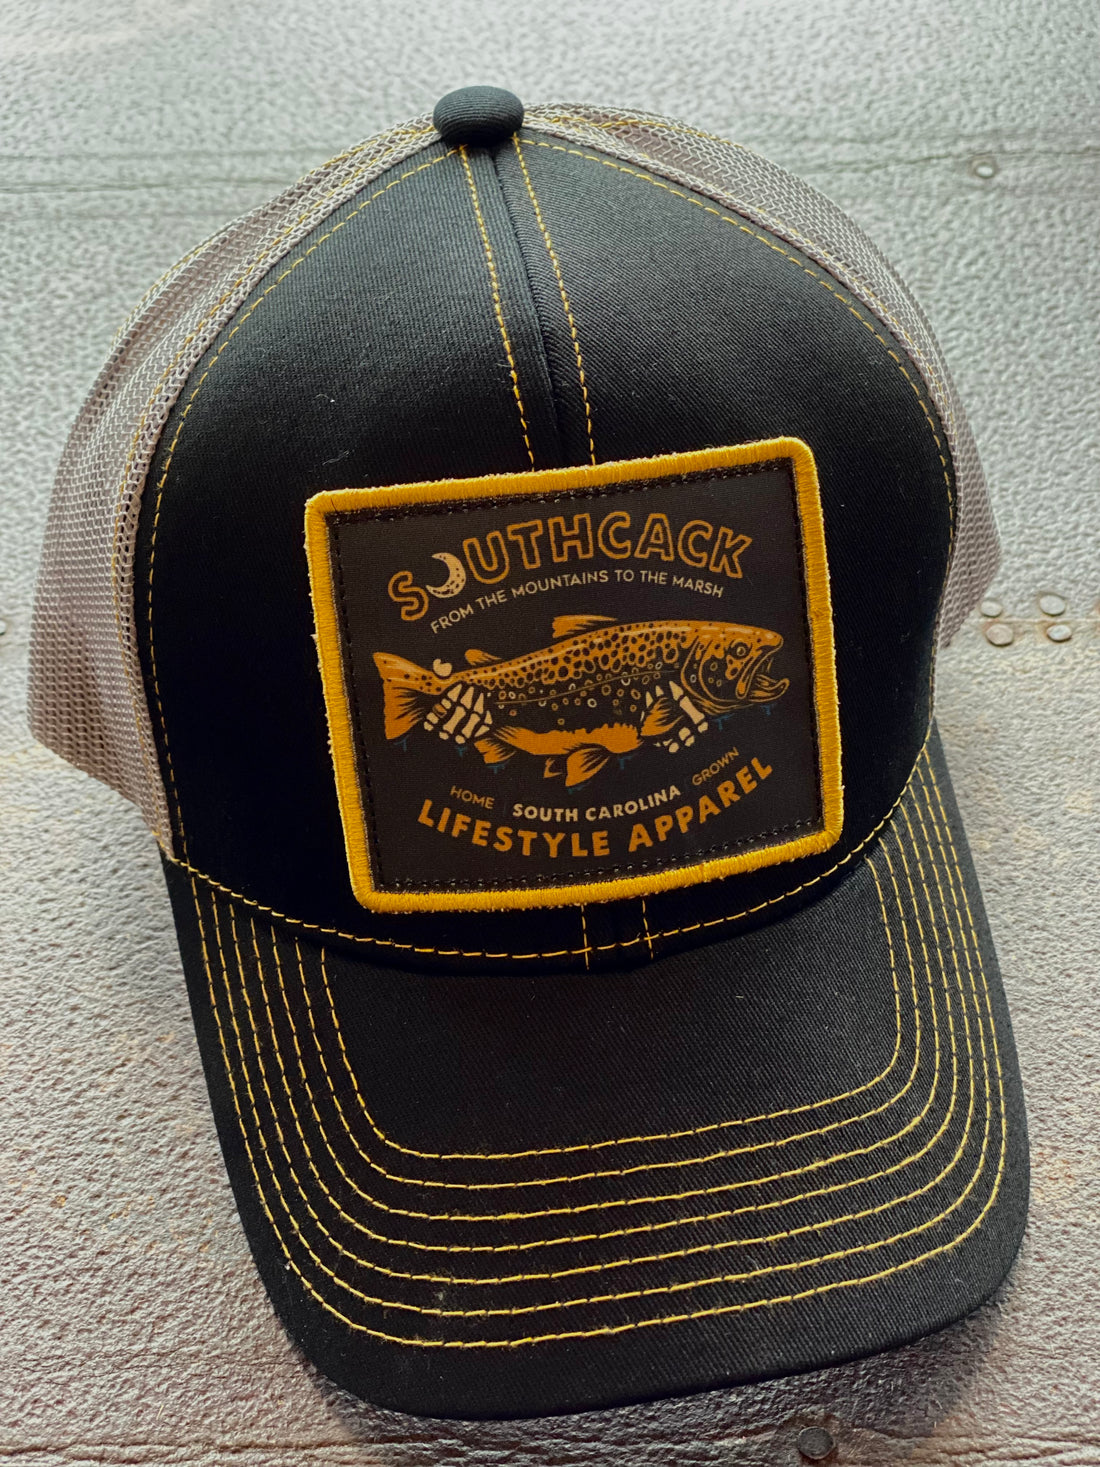 Picture of hat to show design.